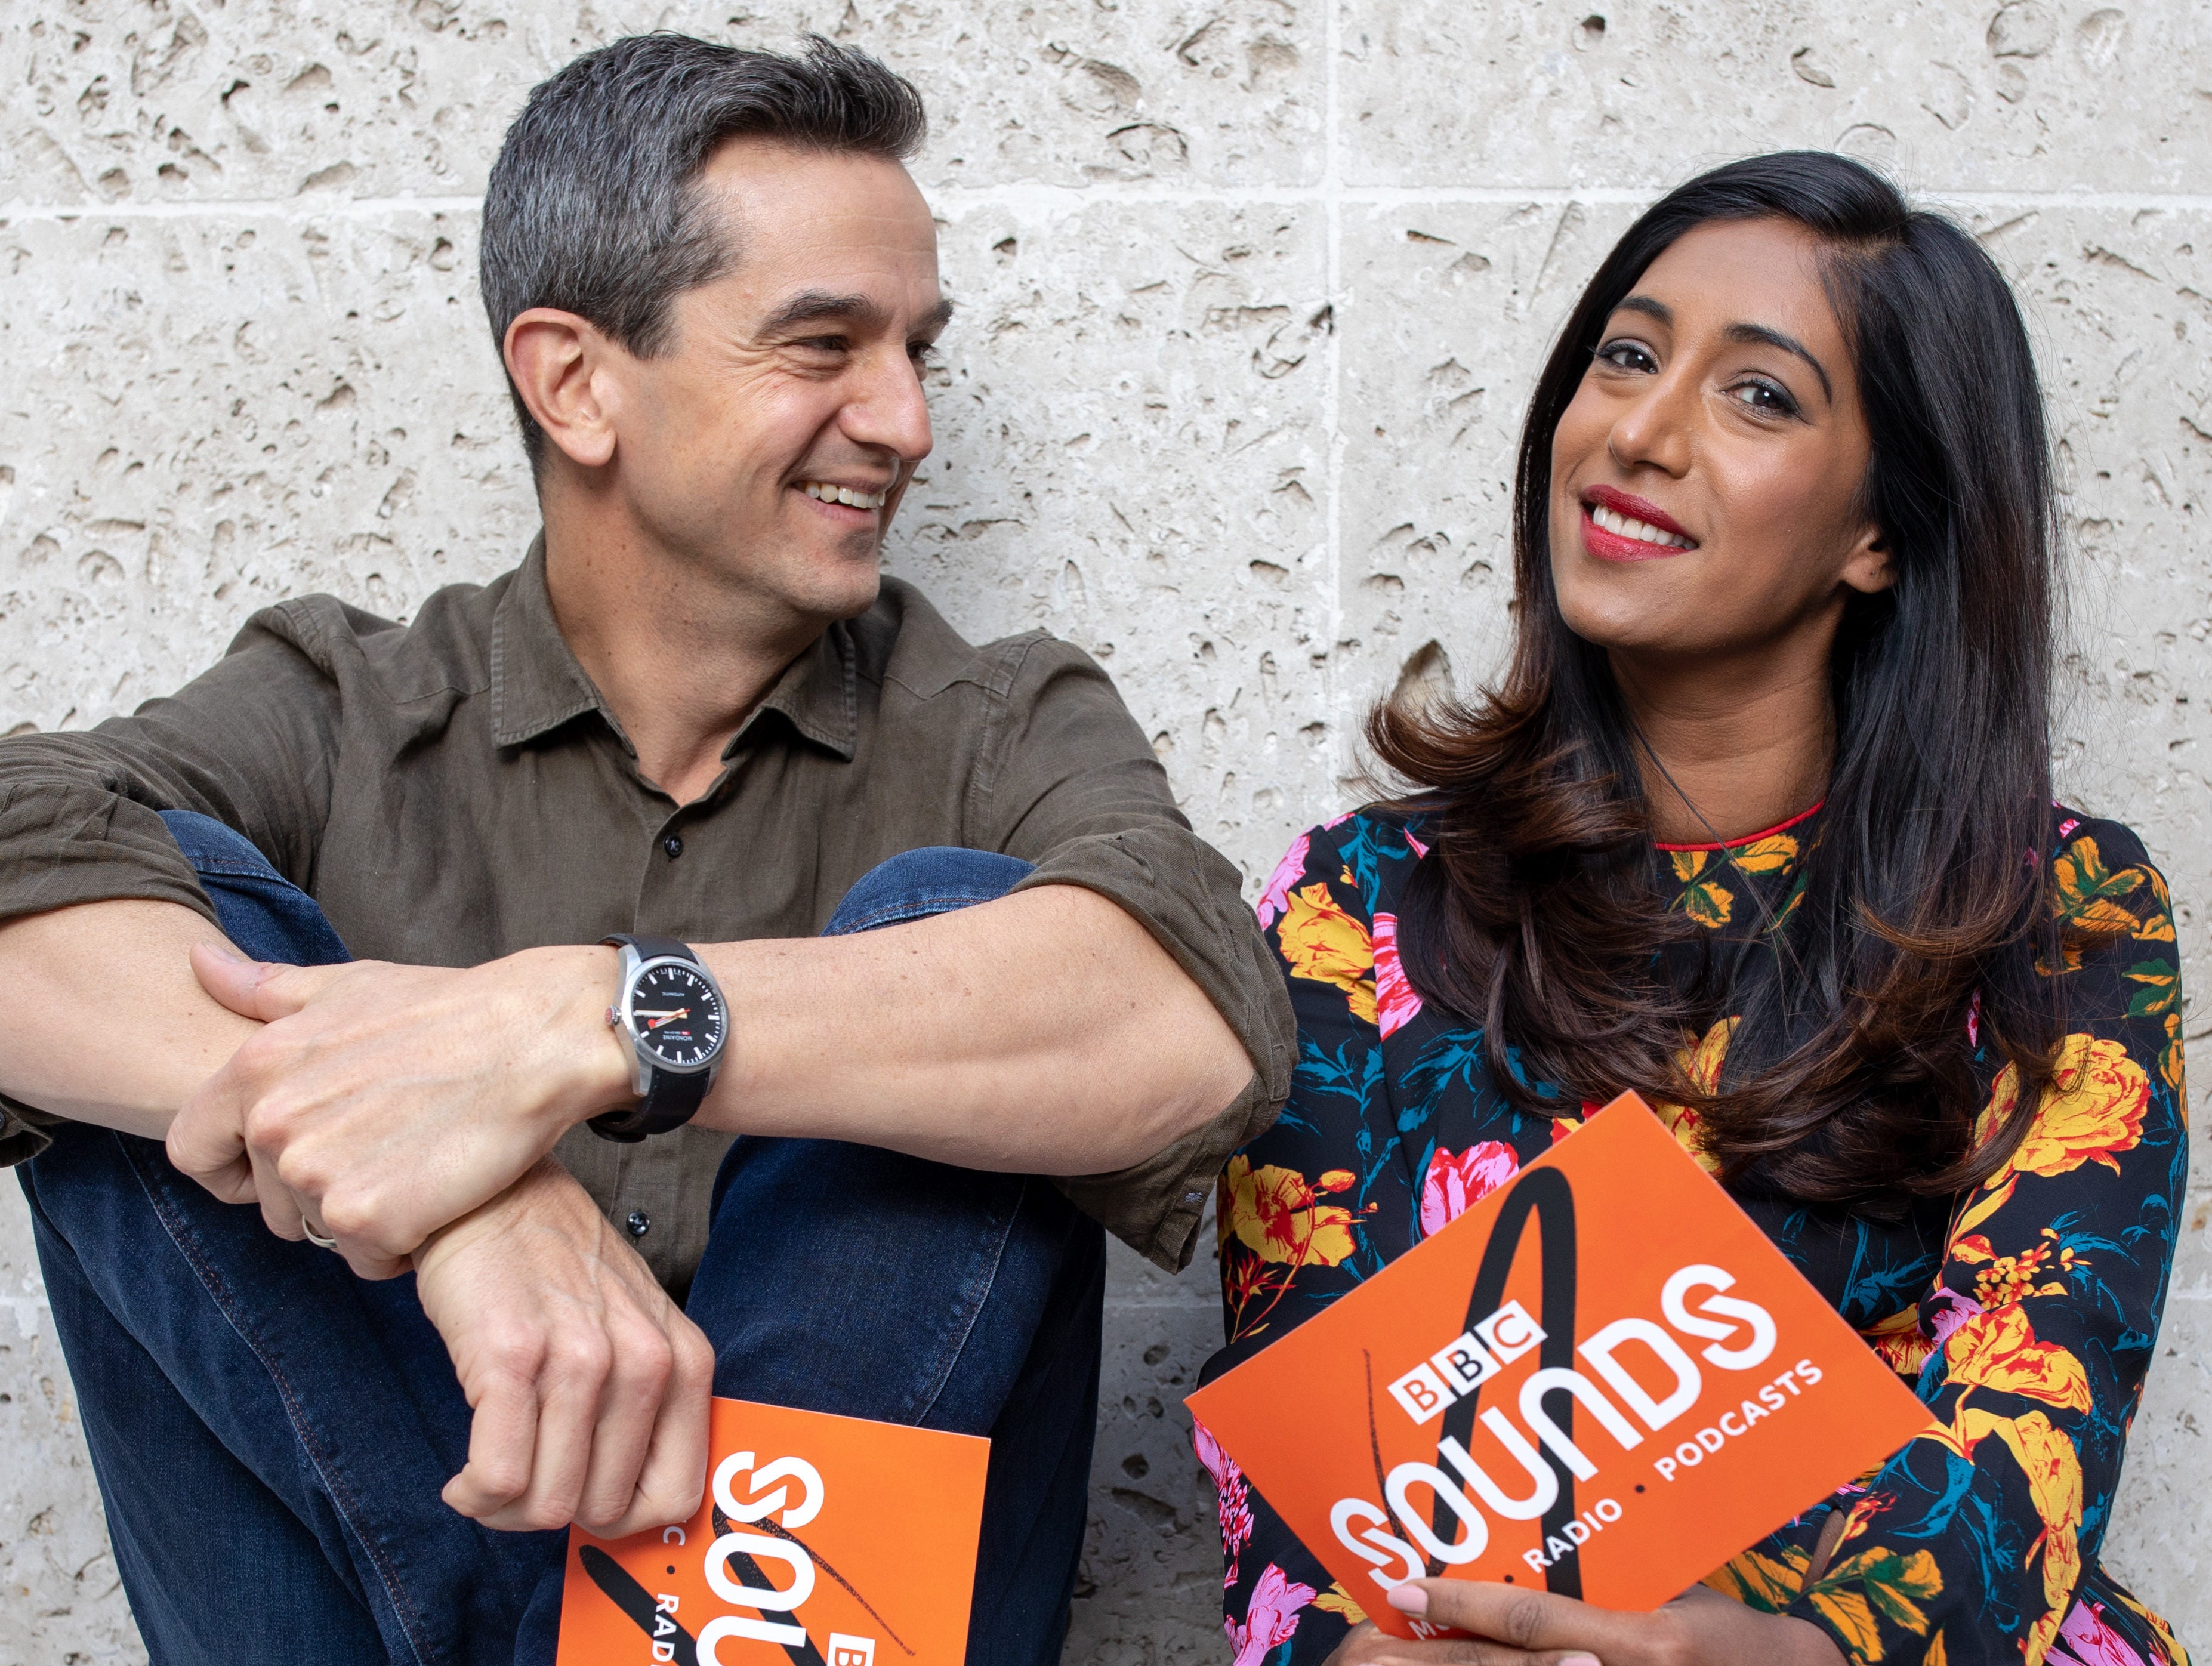 BBC launches Today spin-off podcast with 'conversational and punchy' tone to reach younger on-demand audience